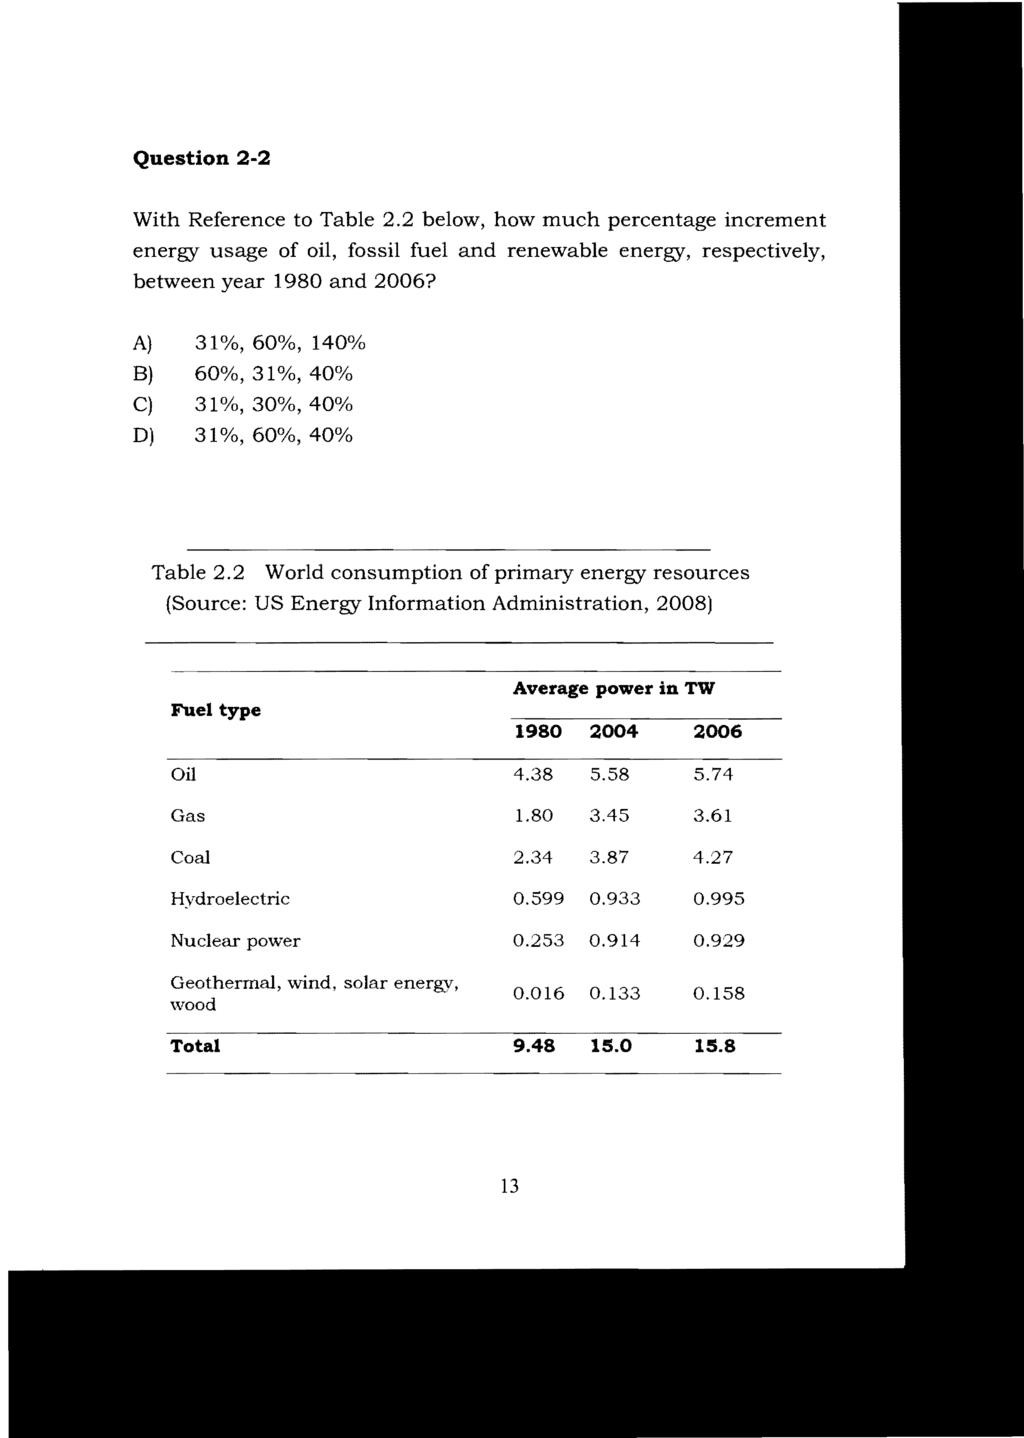 Question 2-2 With Reference to Table 2.2 below, how much percentage increment energy usage of oil, fossil fuel and renewable energy, respectively, between year 1980 and 2006?